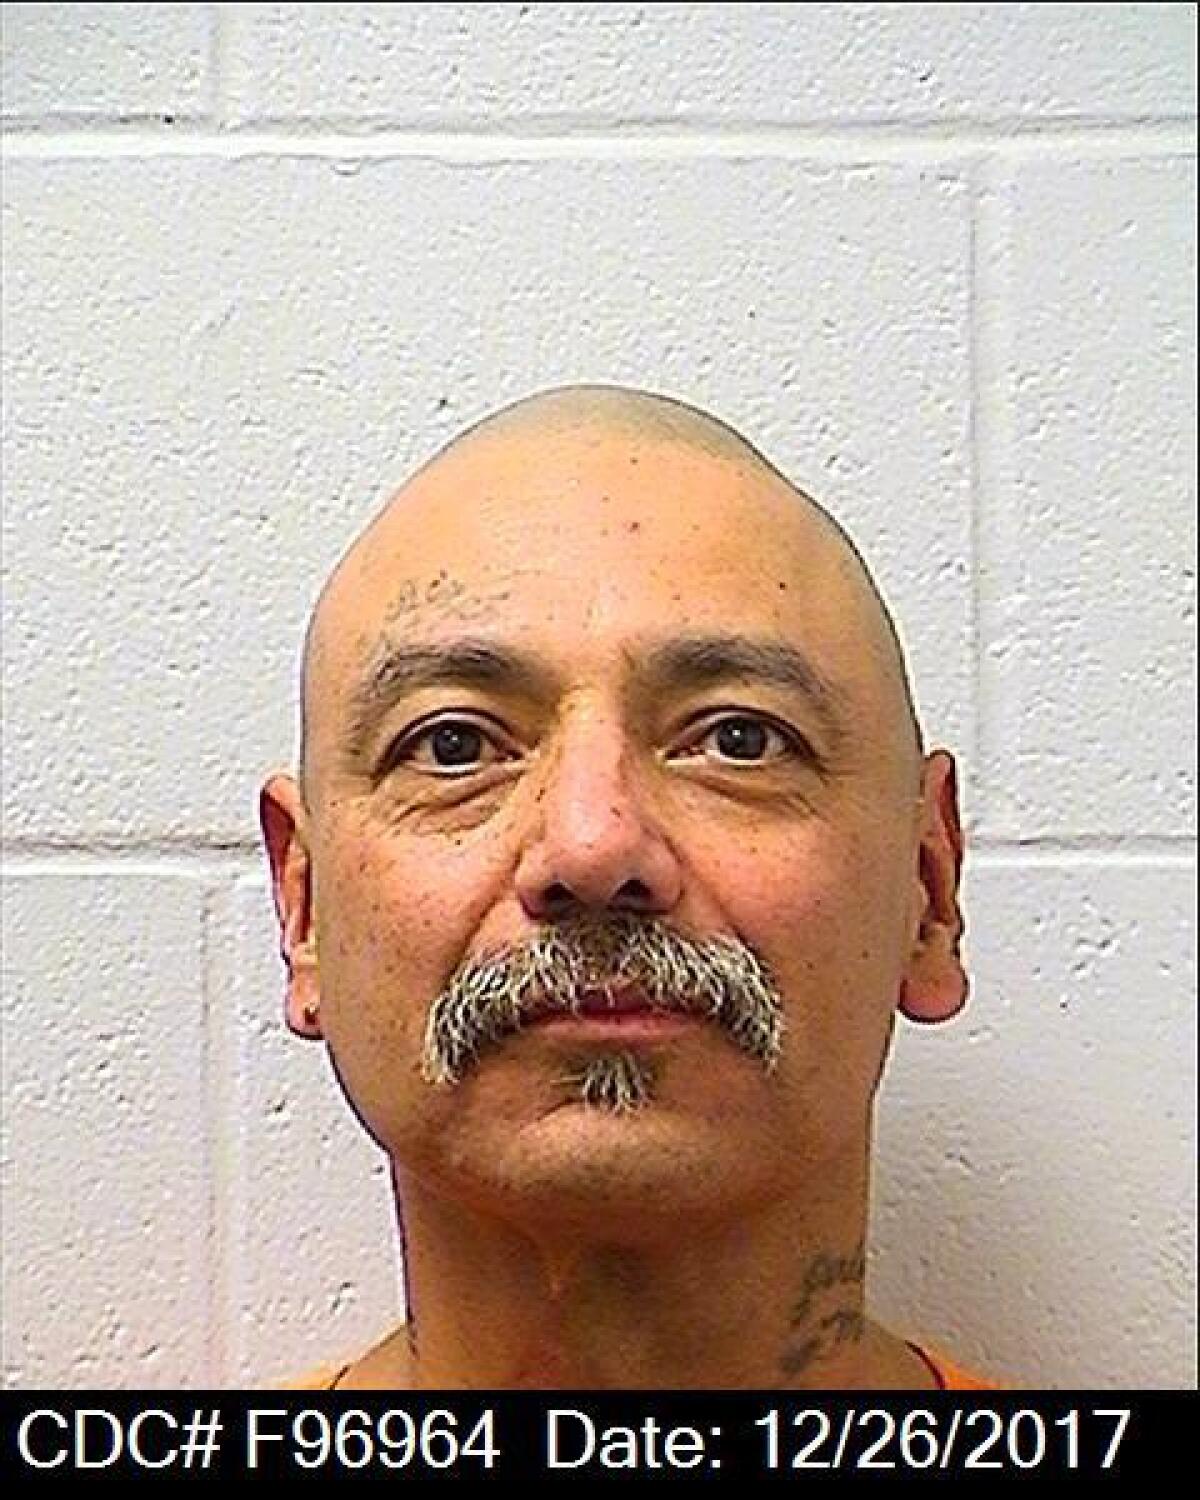 A mugshot of a man with a shaved head and salt-and-pepper mustache photographed against a white block wall.